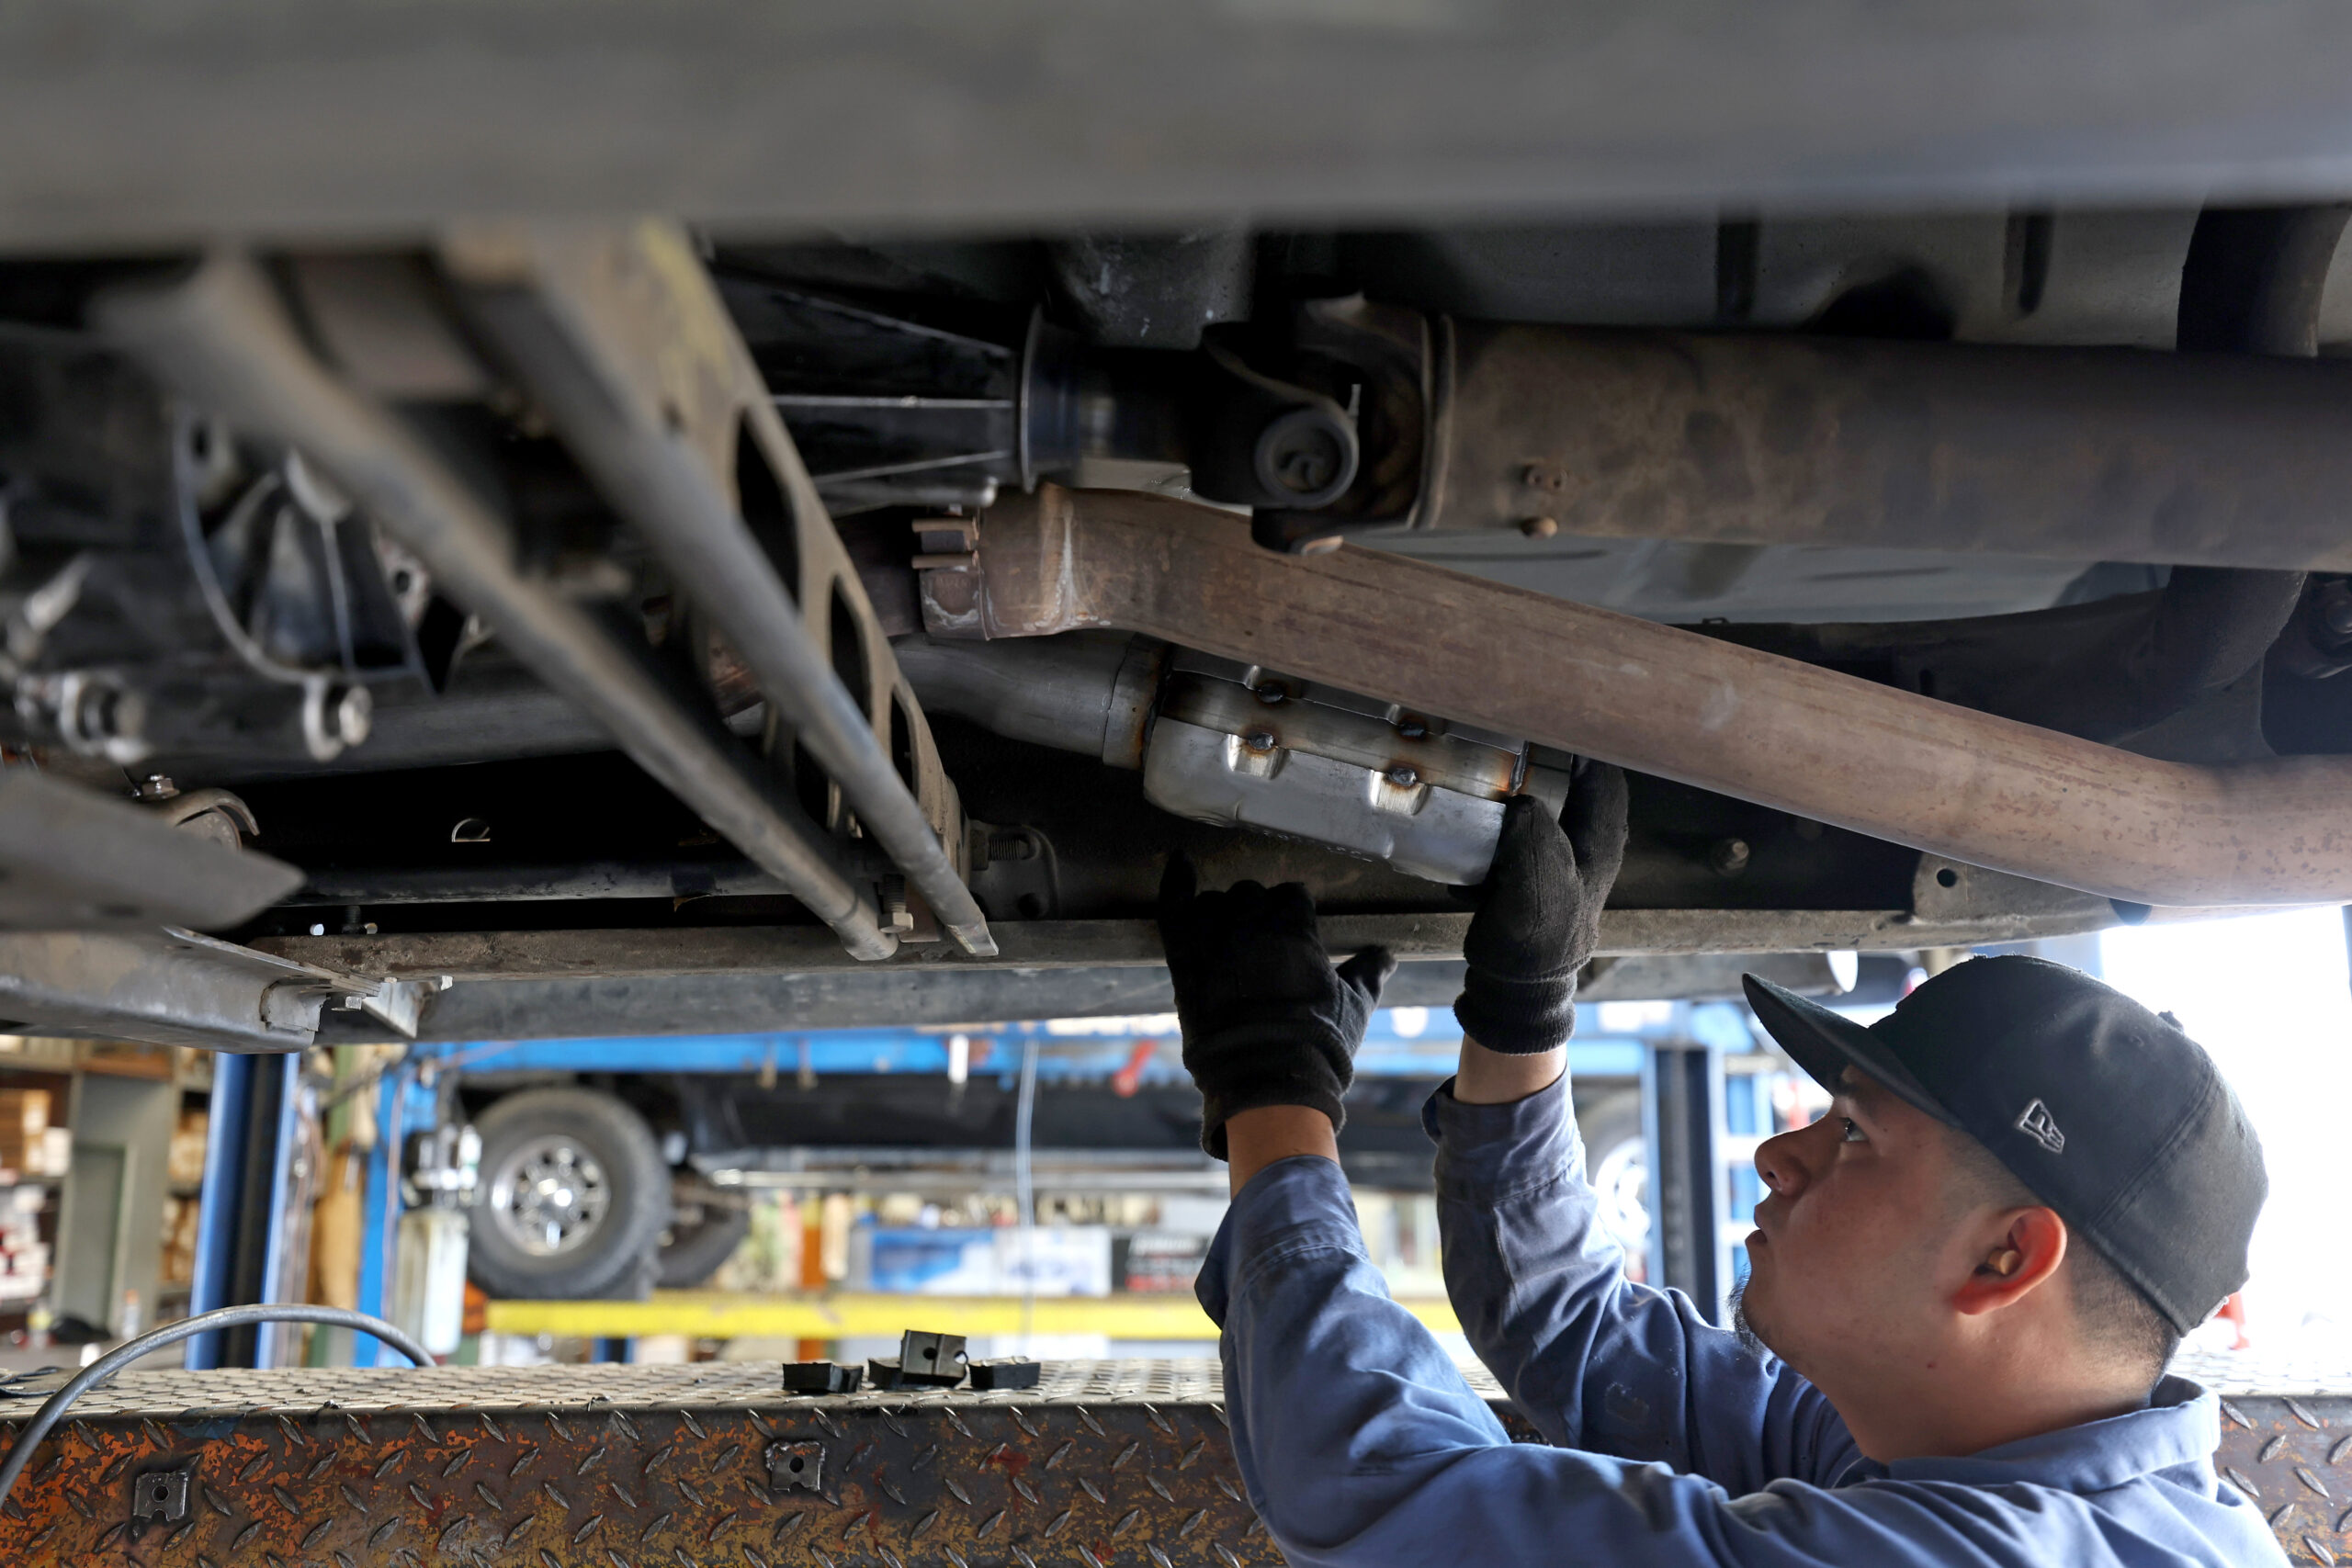 A mechanic works under a lifted vehicle, fixing or inspecting a component.